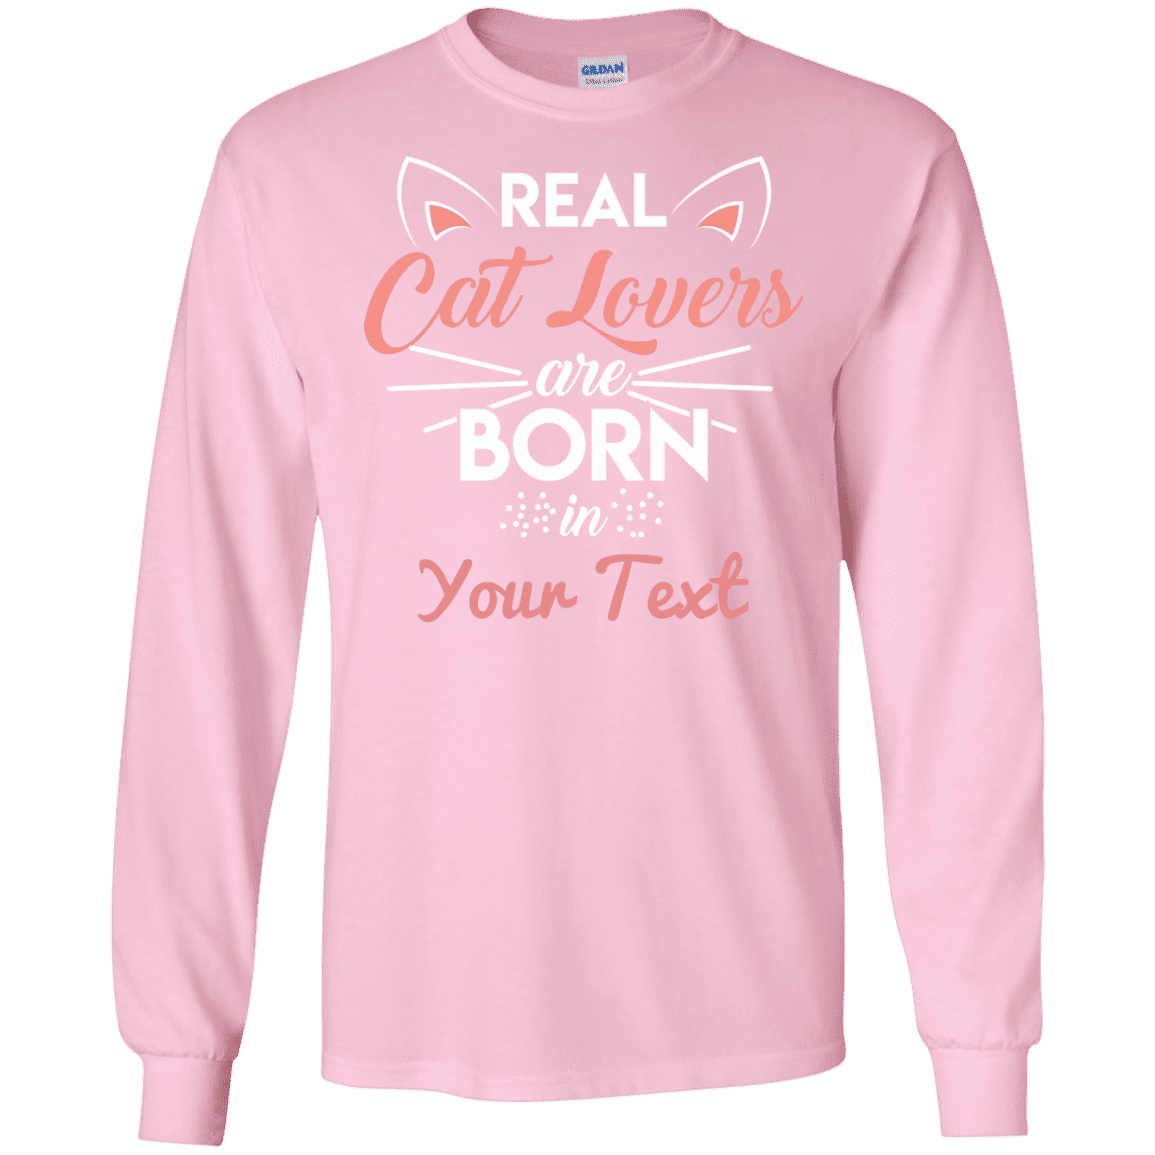 Personalized Real Cat Lovers - Long Sleeve T-Shirt.